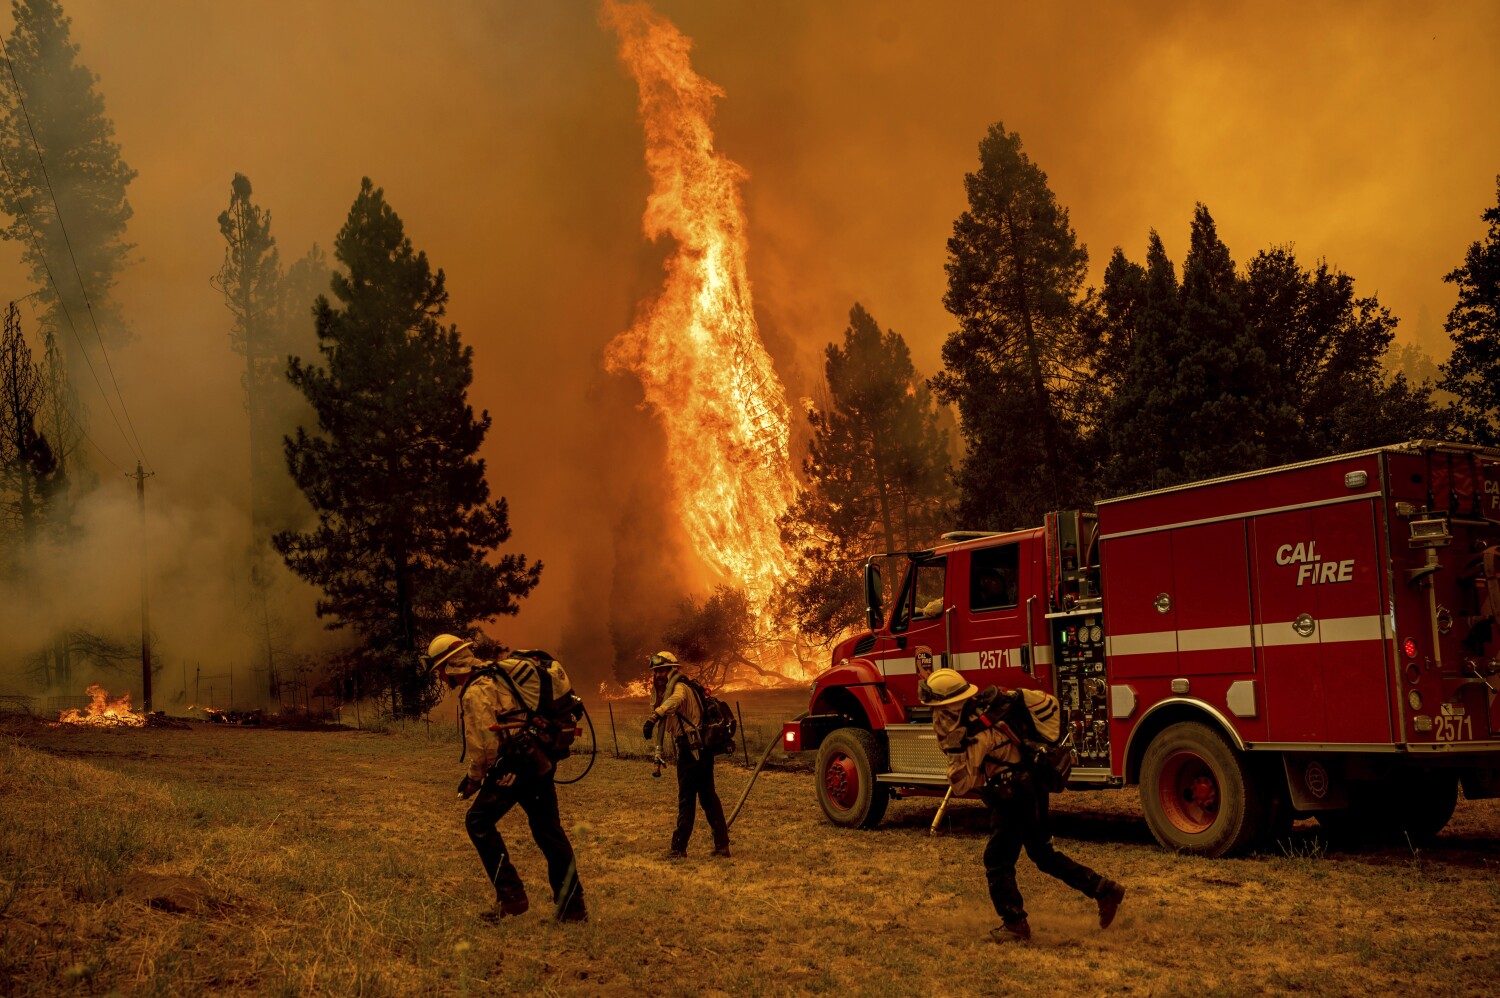 Firefighters face punishing weather conditions in battle against raging fire near Yosemite